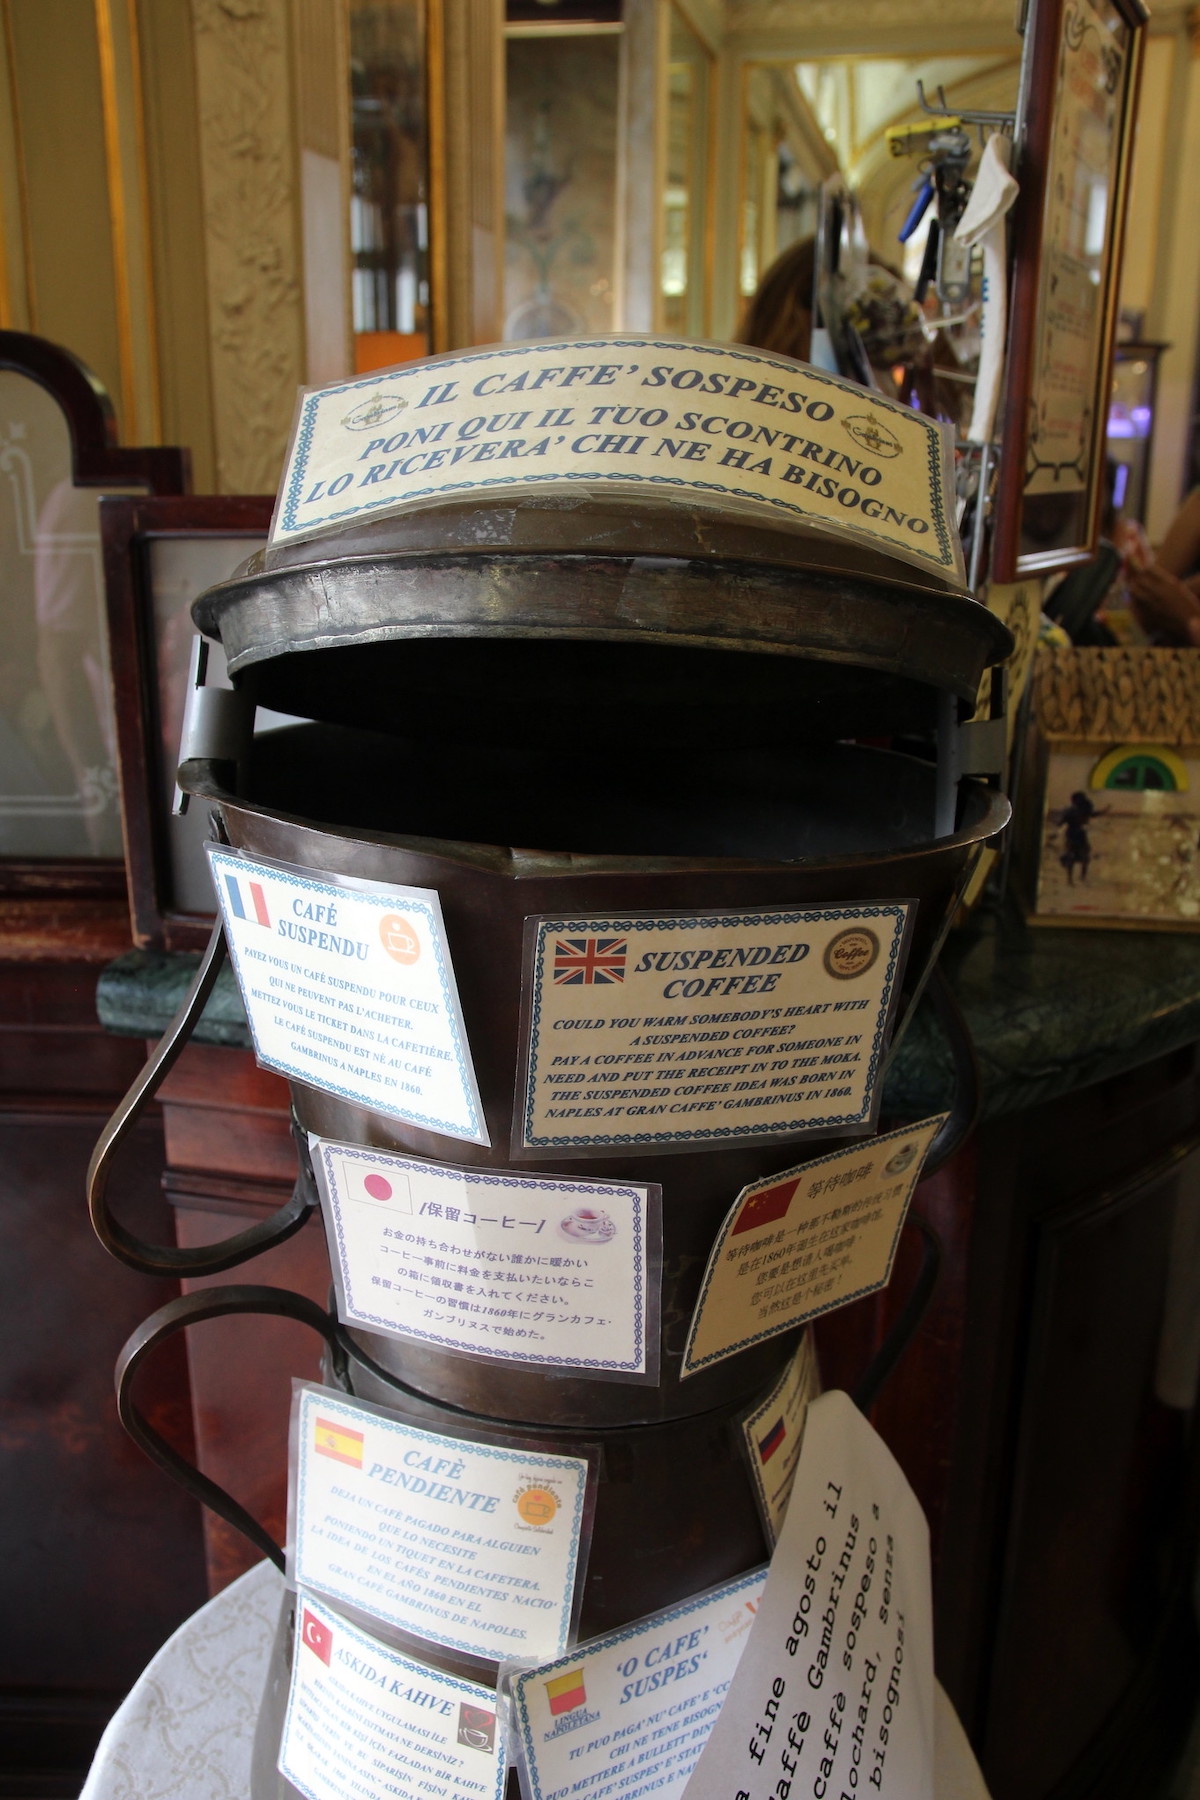 A old coffee pot is covered with cards for "caffe sospeso", a tradition where a patrom of a coffee shop can purchase an extra coffee and leave behind a receipt so that someone down on their luck can come and enjoy a coffee for free